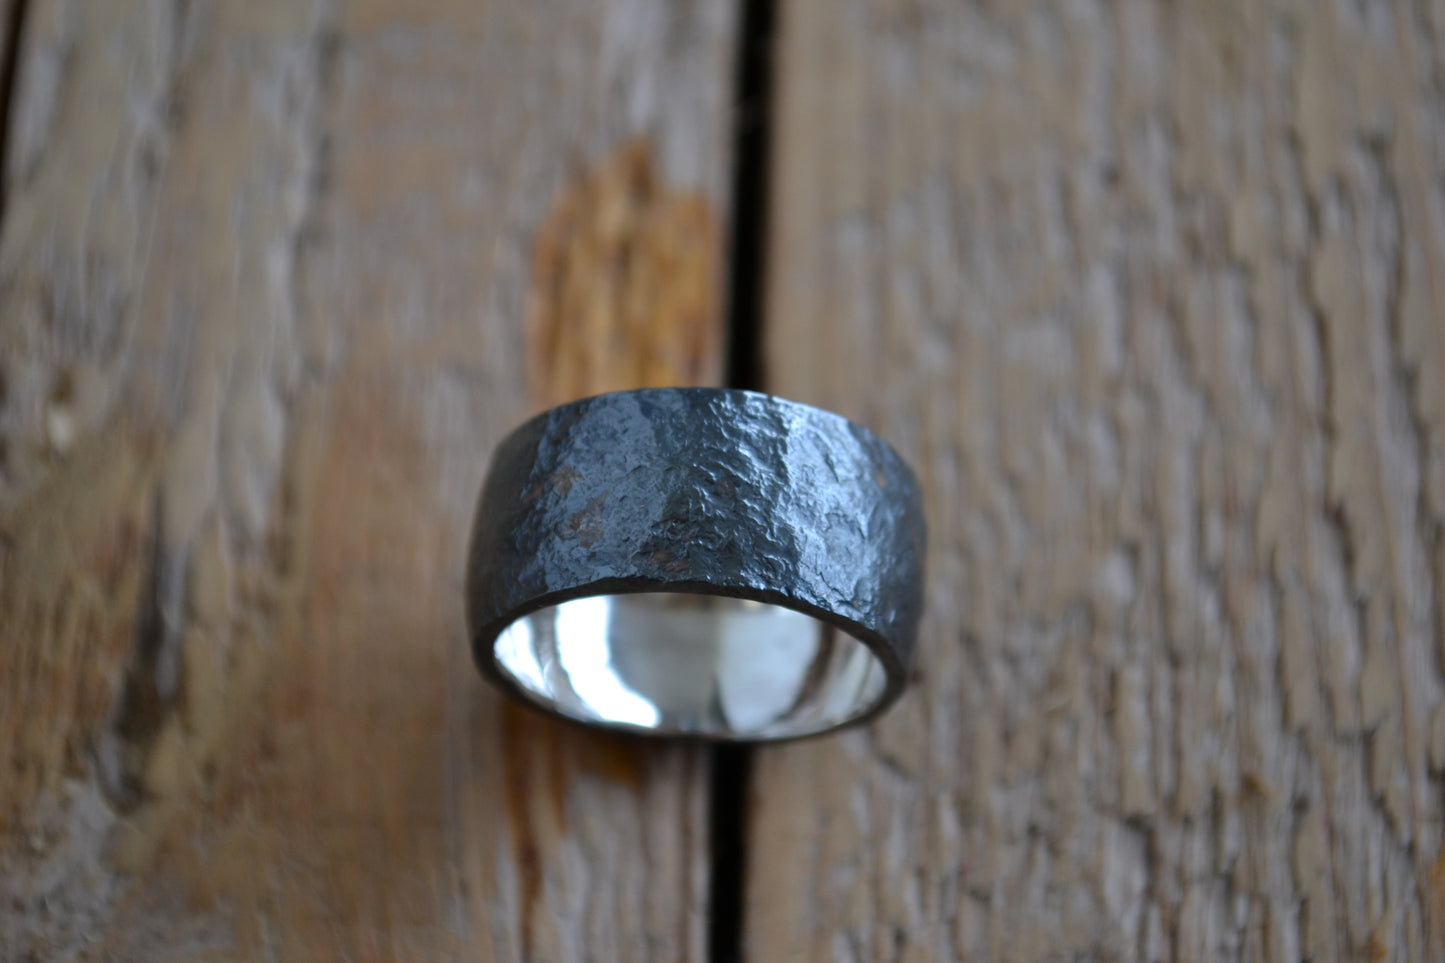 Man's wide ring of oxidated silver with irregular surface